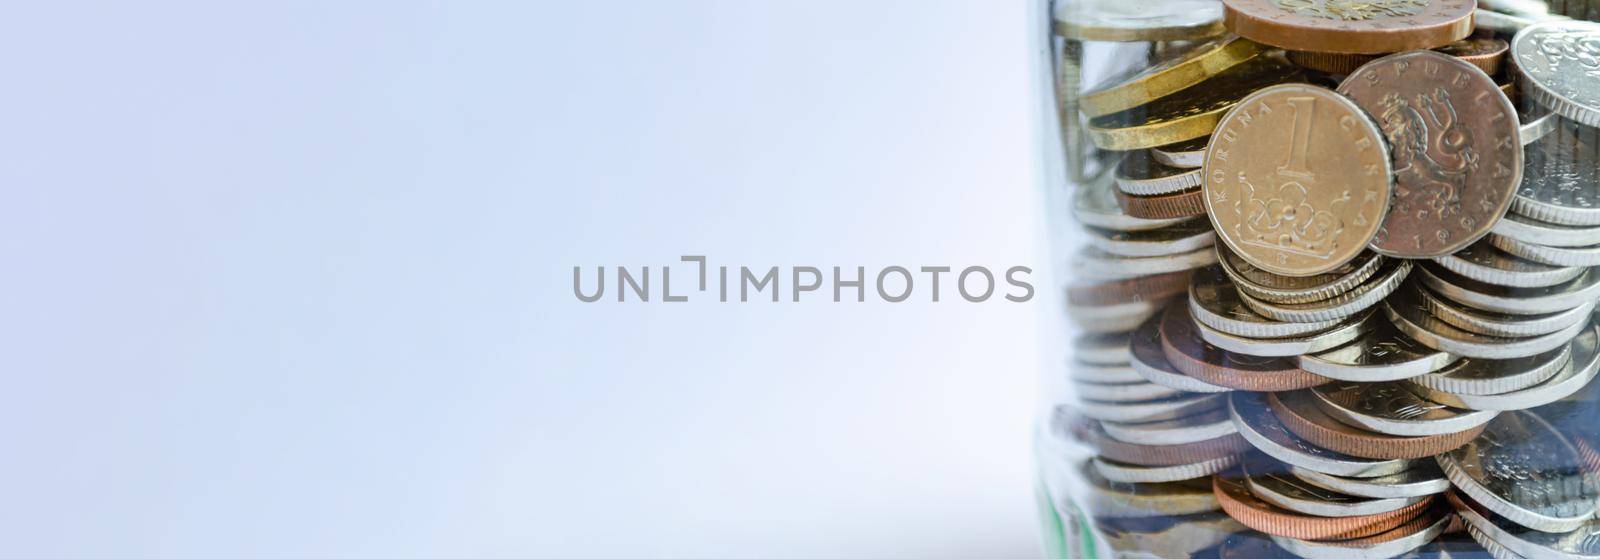 A glass jar full of coins, money related web banner with copy space, czech crowns